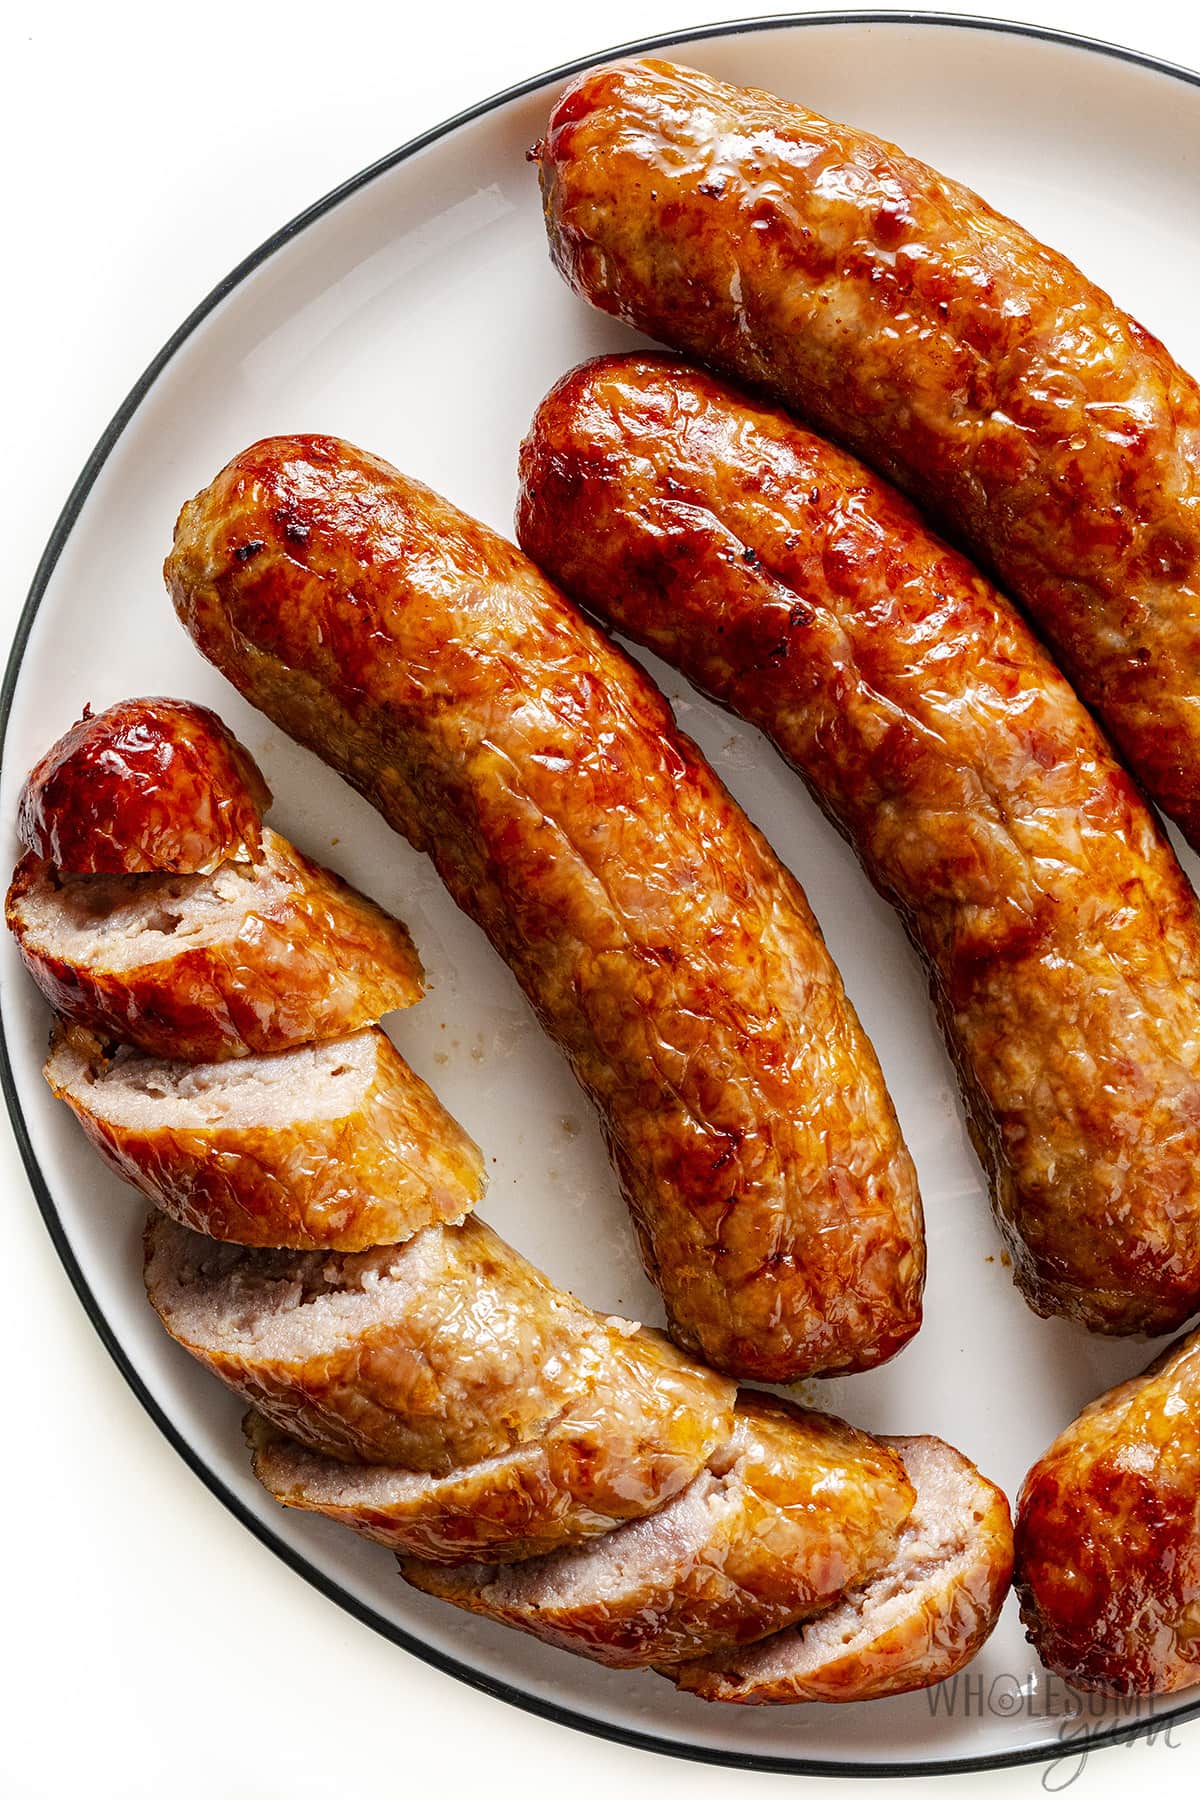 Brats on a plate with one cut into slices.